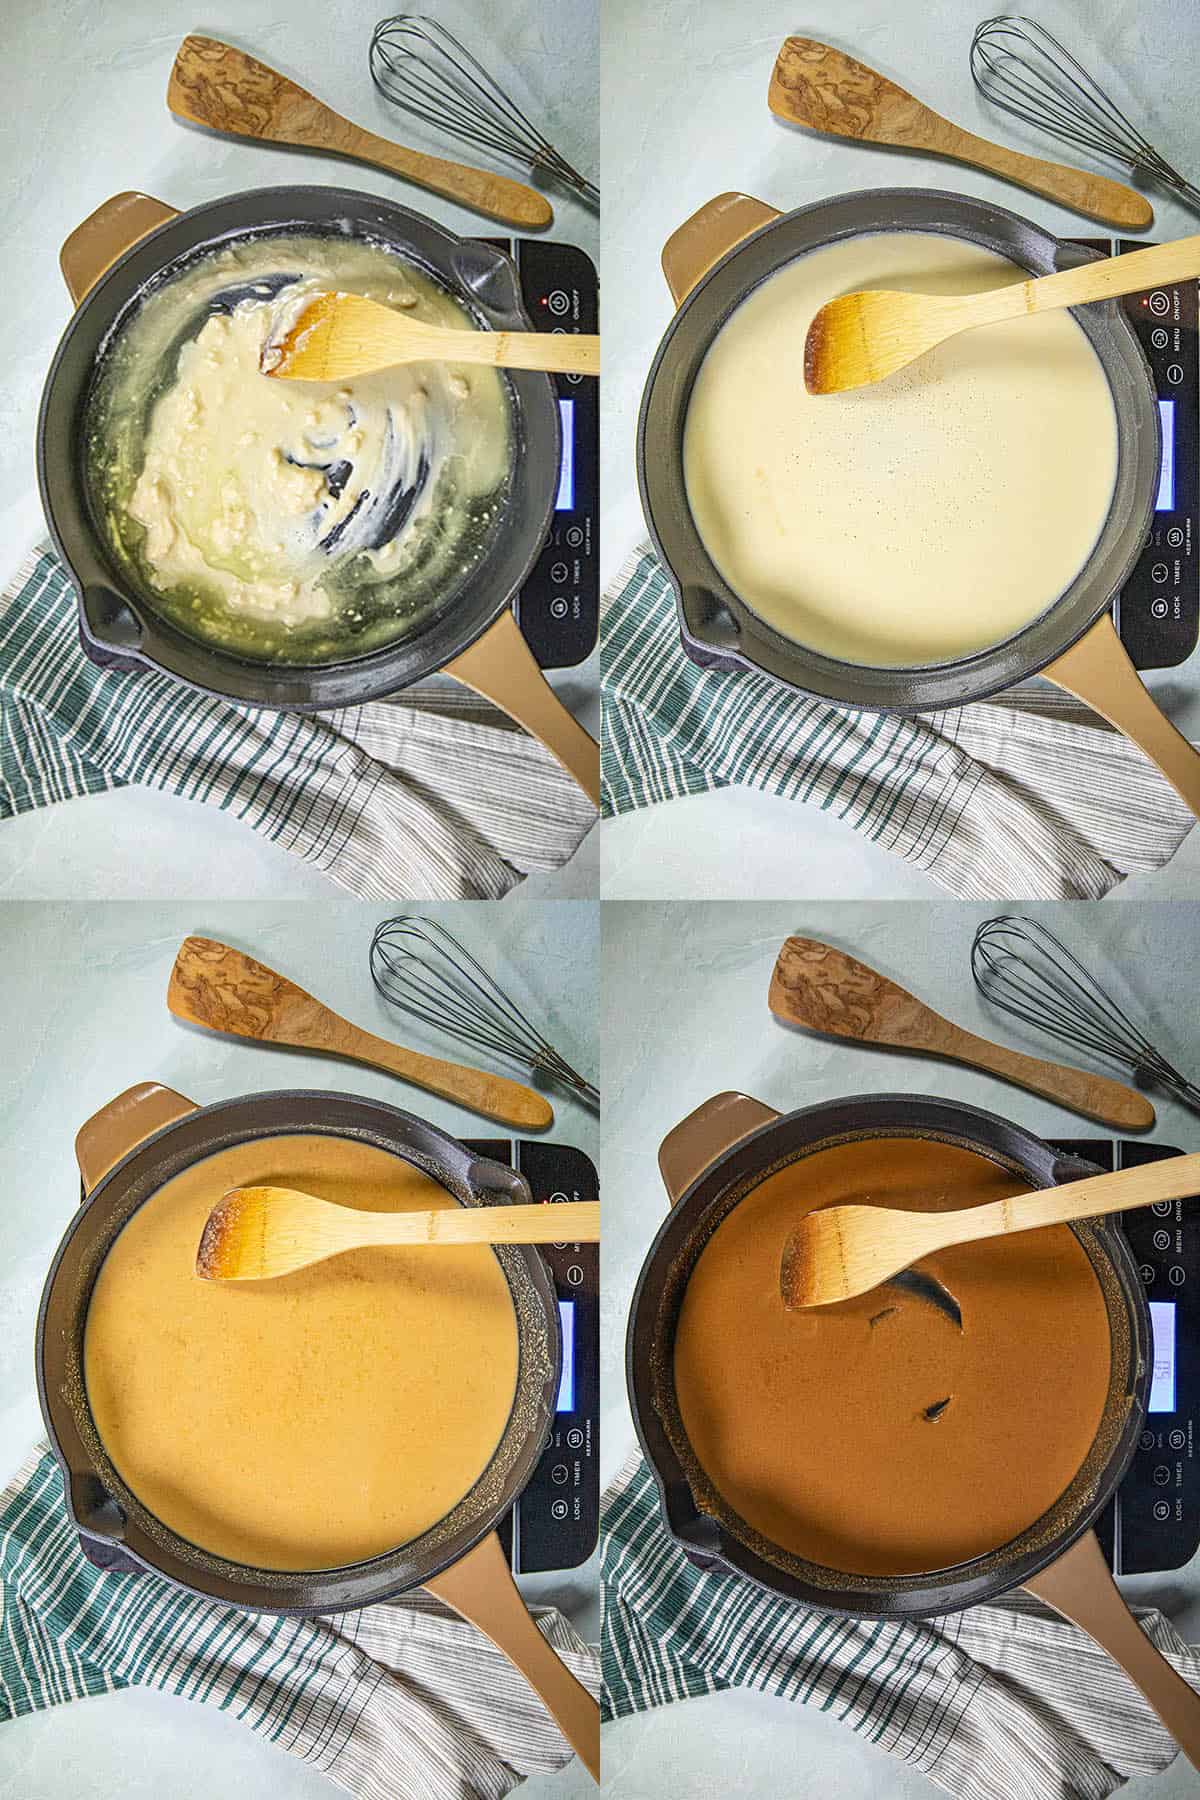 Steps for making a roux, from mixing, to a white roux, blonde roux, and dark roux.